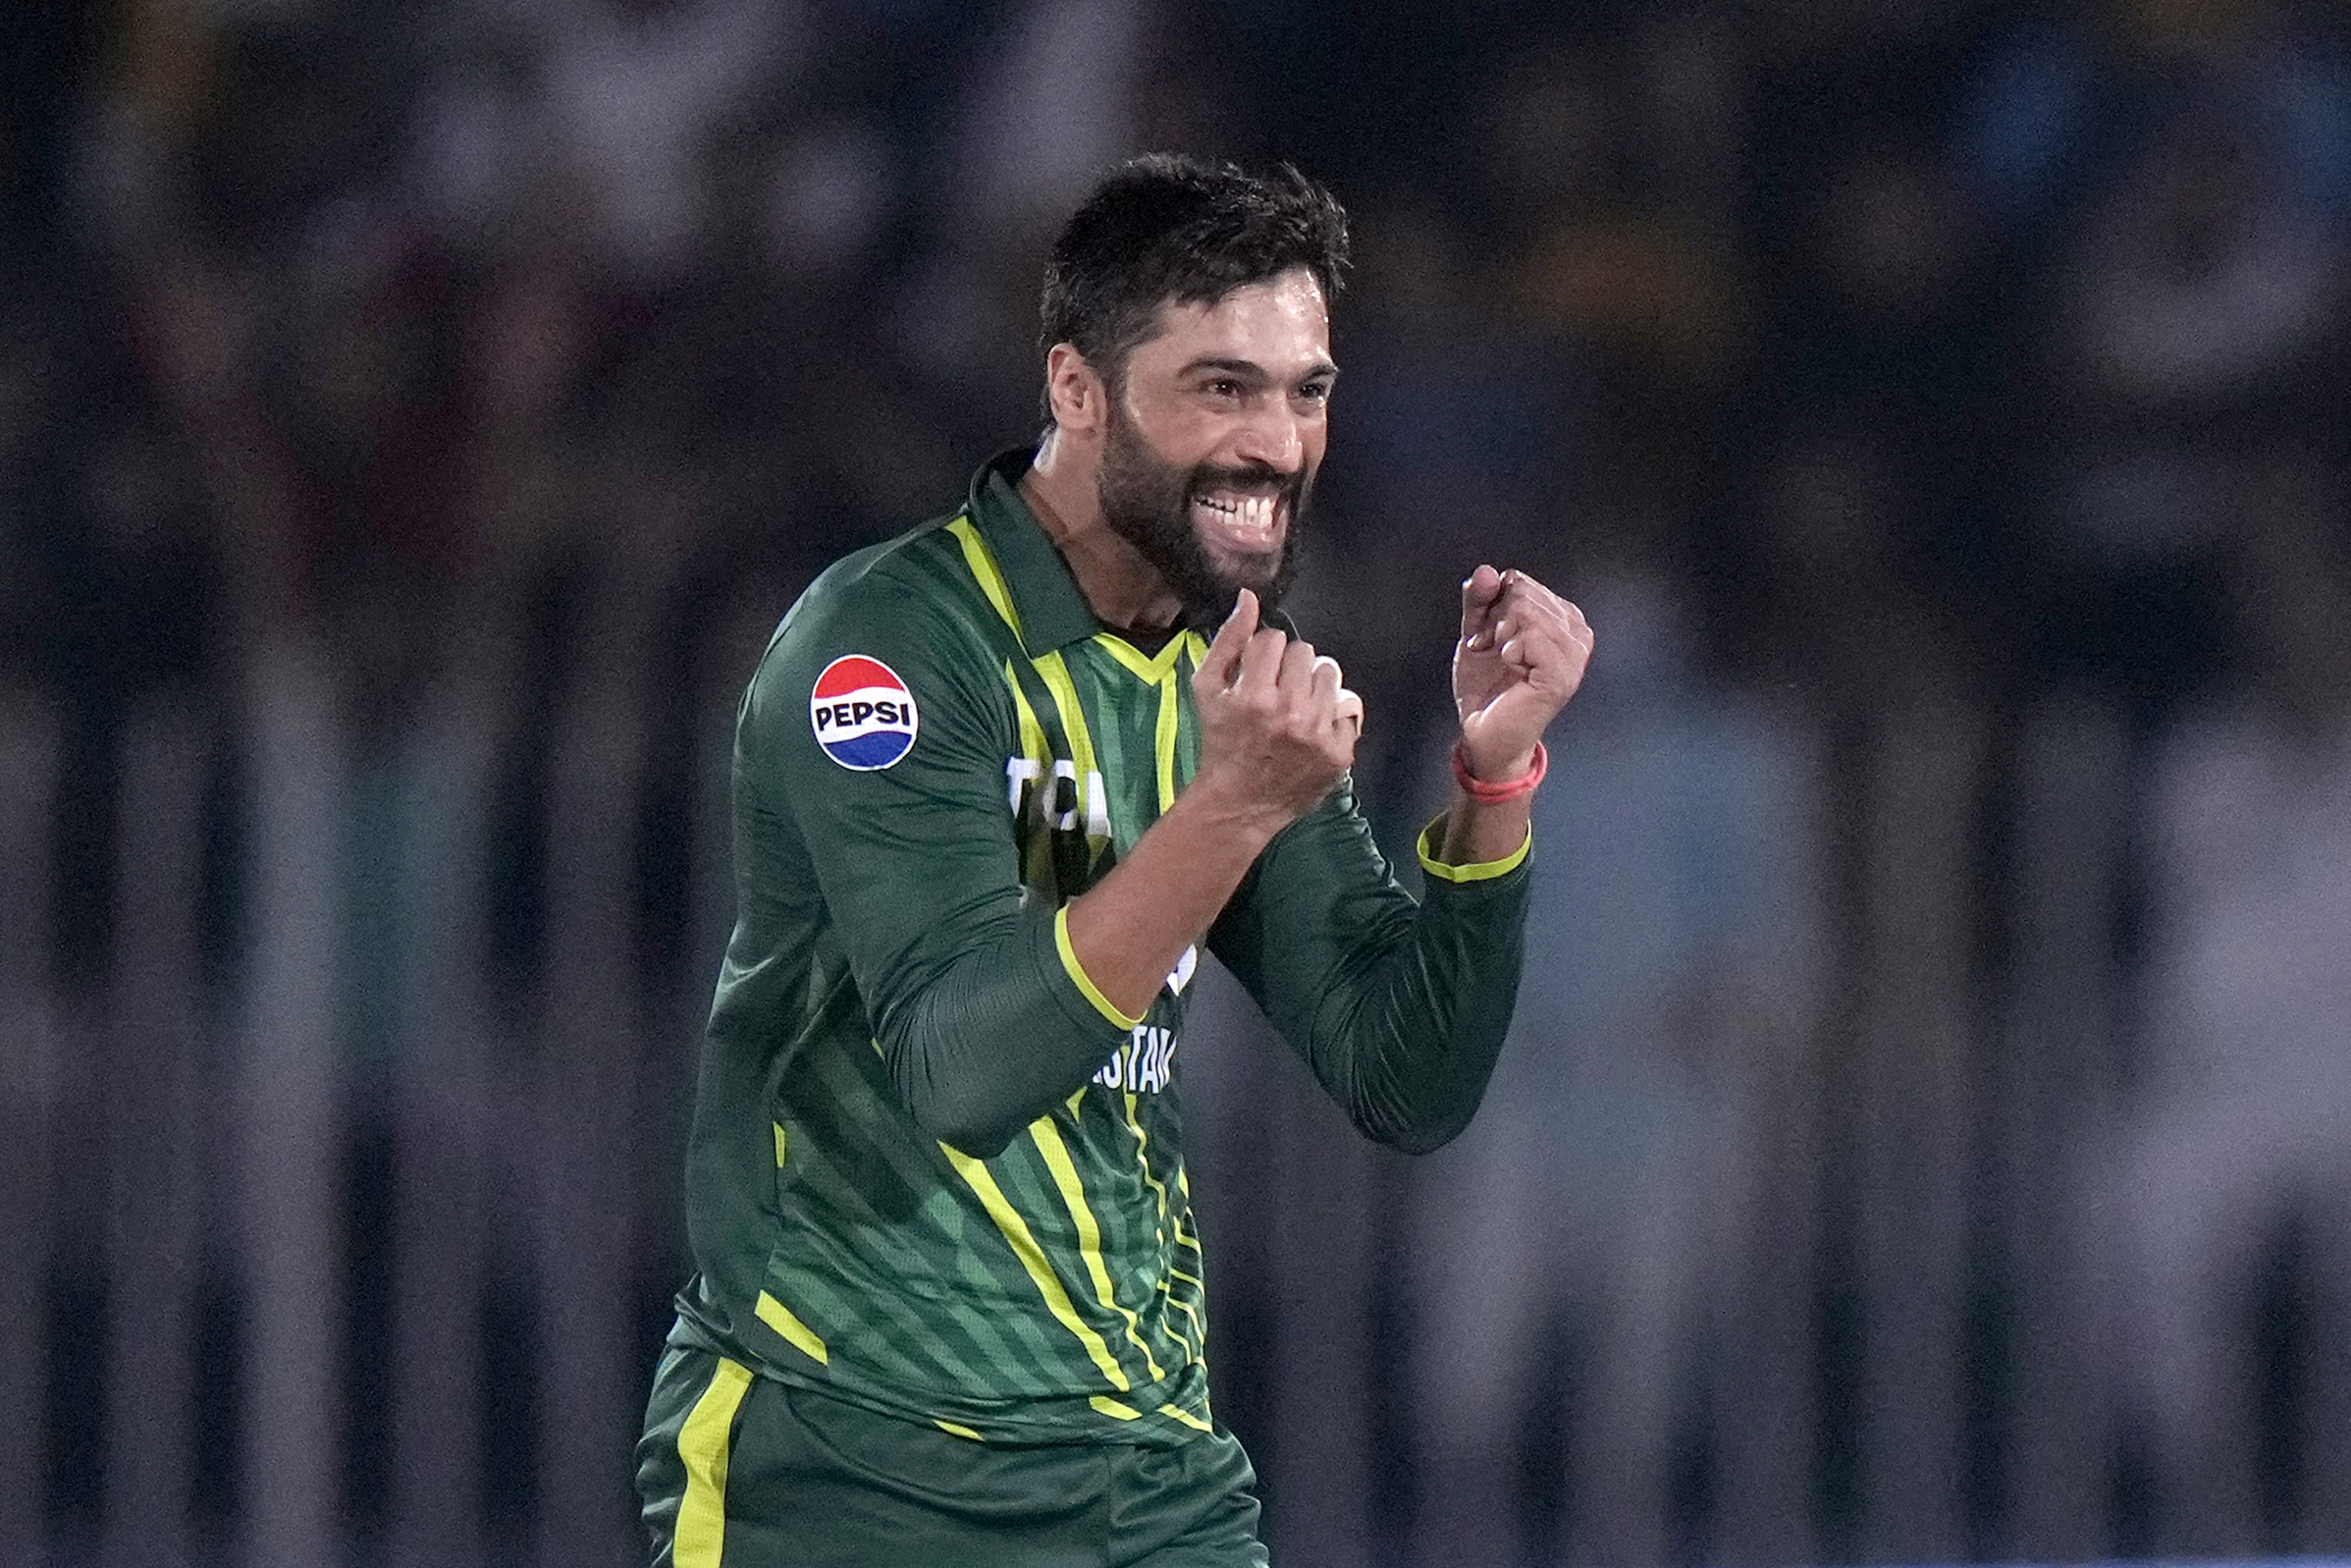 Fast bowler Amir receives visa and will join Pakistan in Dublin for 2 T20s